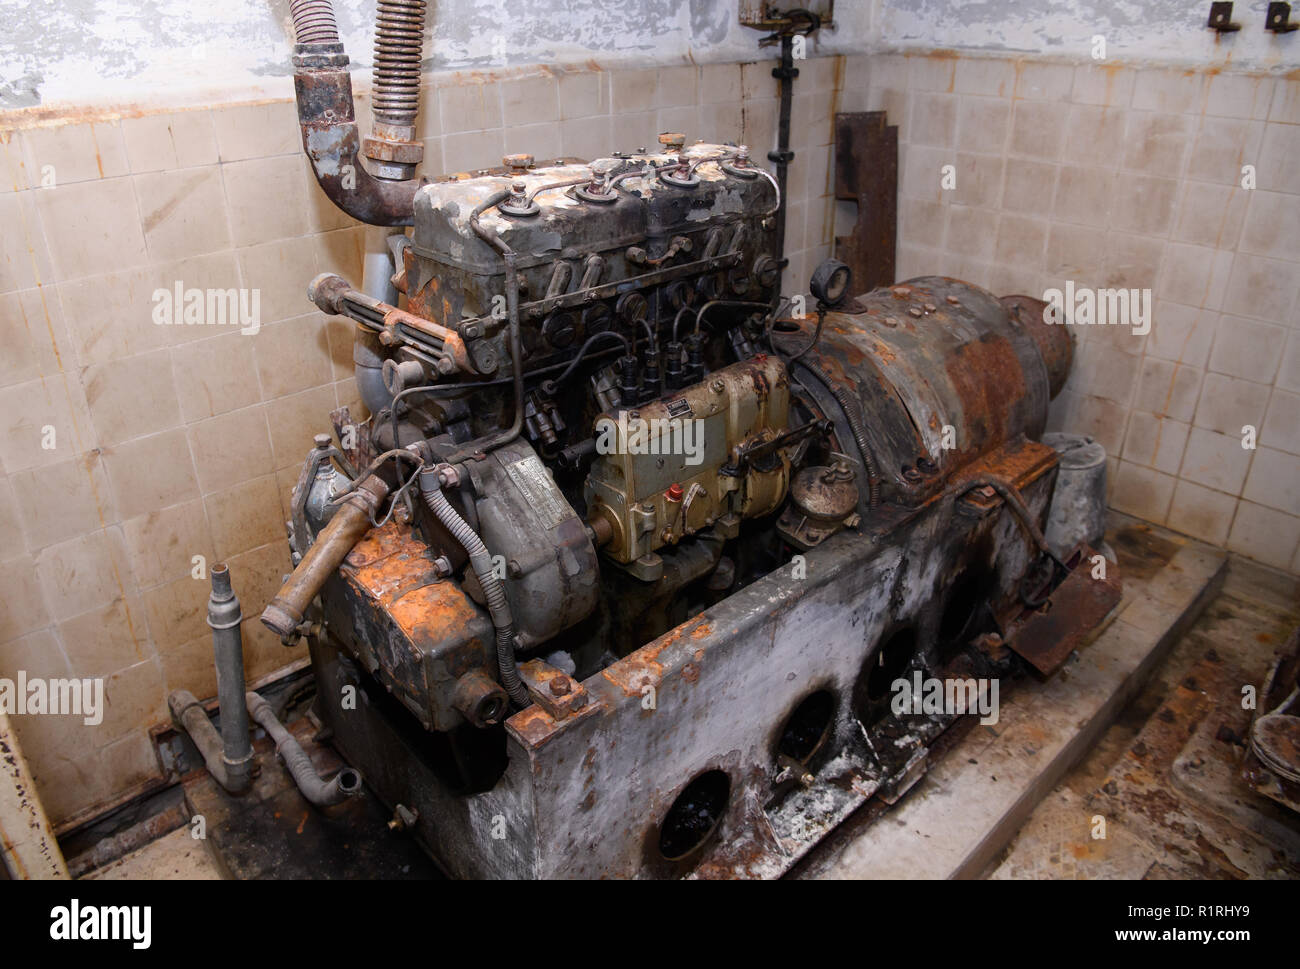 Pullach, Germany. 09th Nov, 2018. An old diesel generator stands in a bunker under the presidential villa on the premises of the Federal Intelligence Service (BND). The villa was once the residence of Martin Bormann, head of the party office of the NSDAP and a confidant of Hitler, and belonged to the former Reichssiedlung Rudolf Heß, which was built between 1936 and 1938. From 1947, the buildings were used by the Gehlen organization and later by the Federal Intelligence Service (BND). Credit: Sven Hoppe/dpa/Alamy Live News Stock Photo